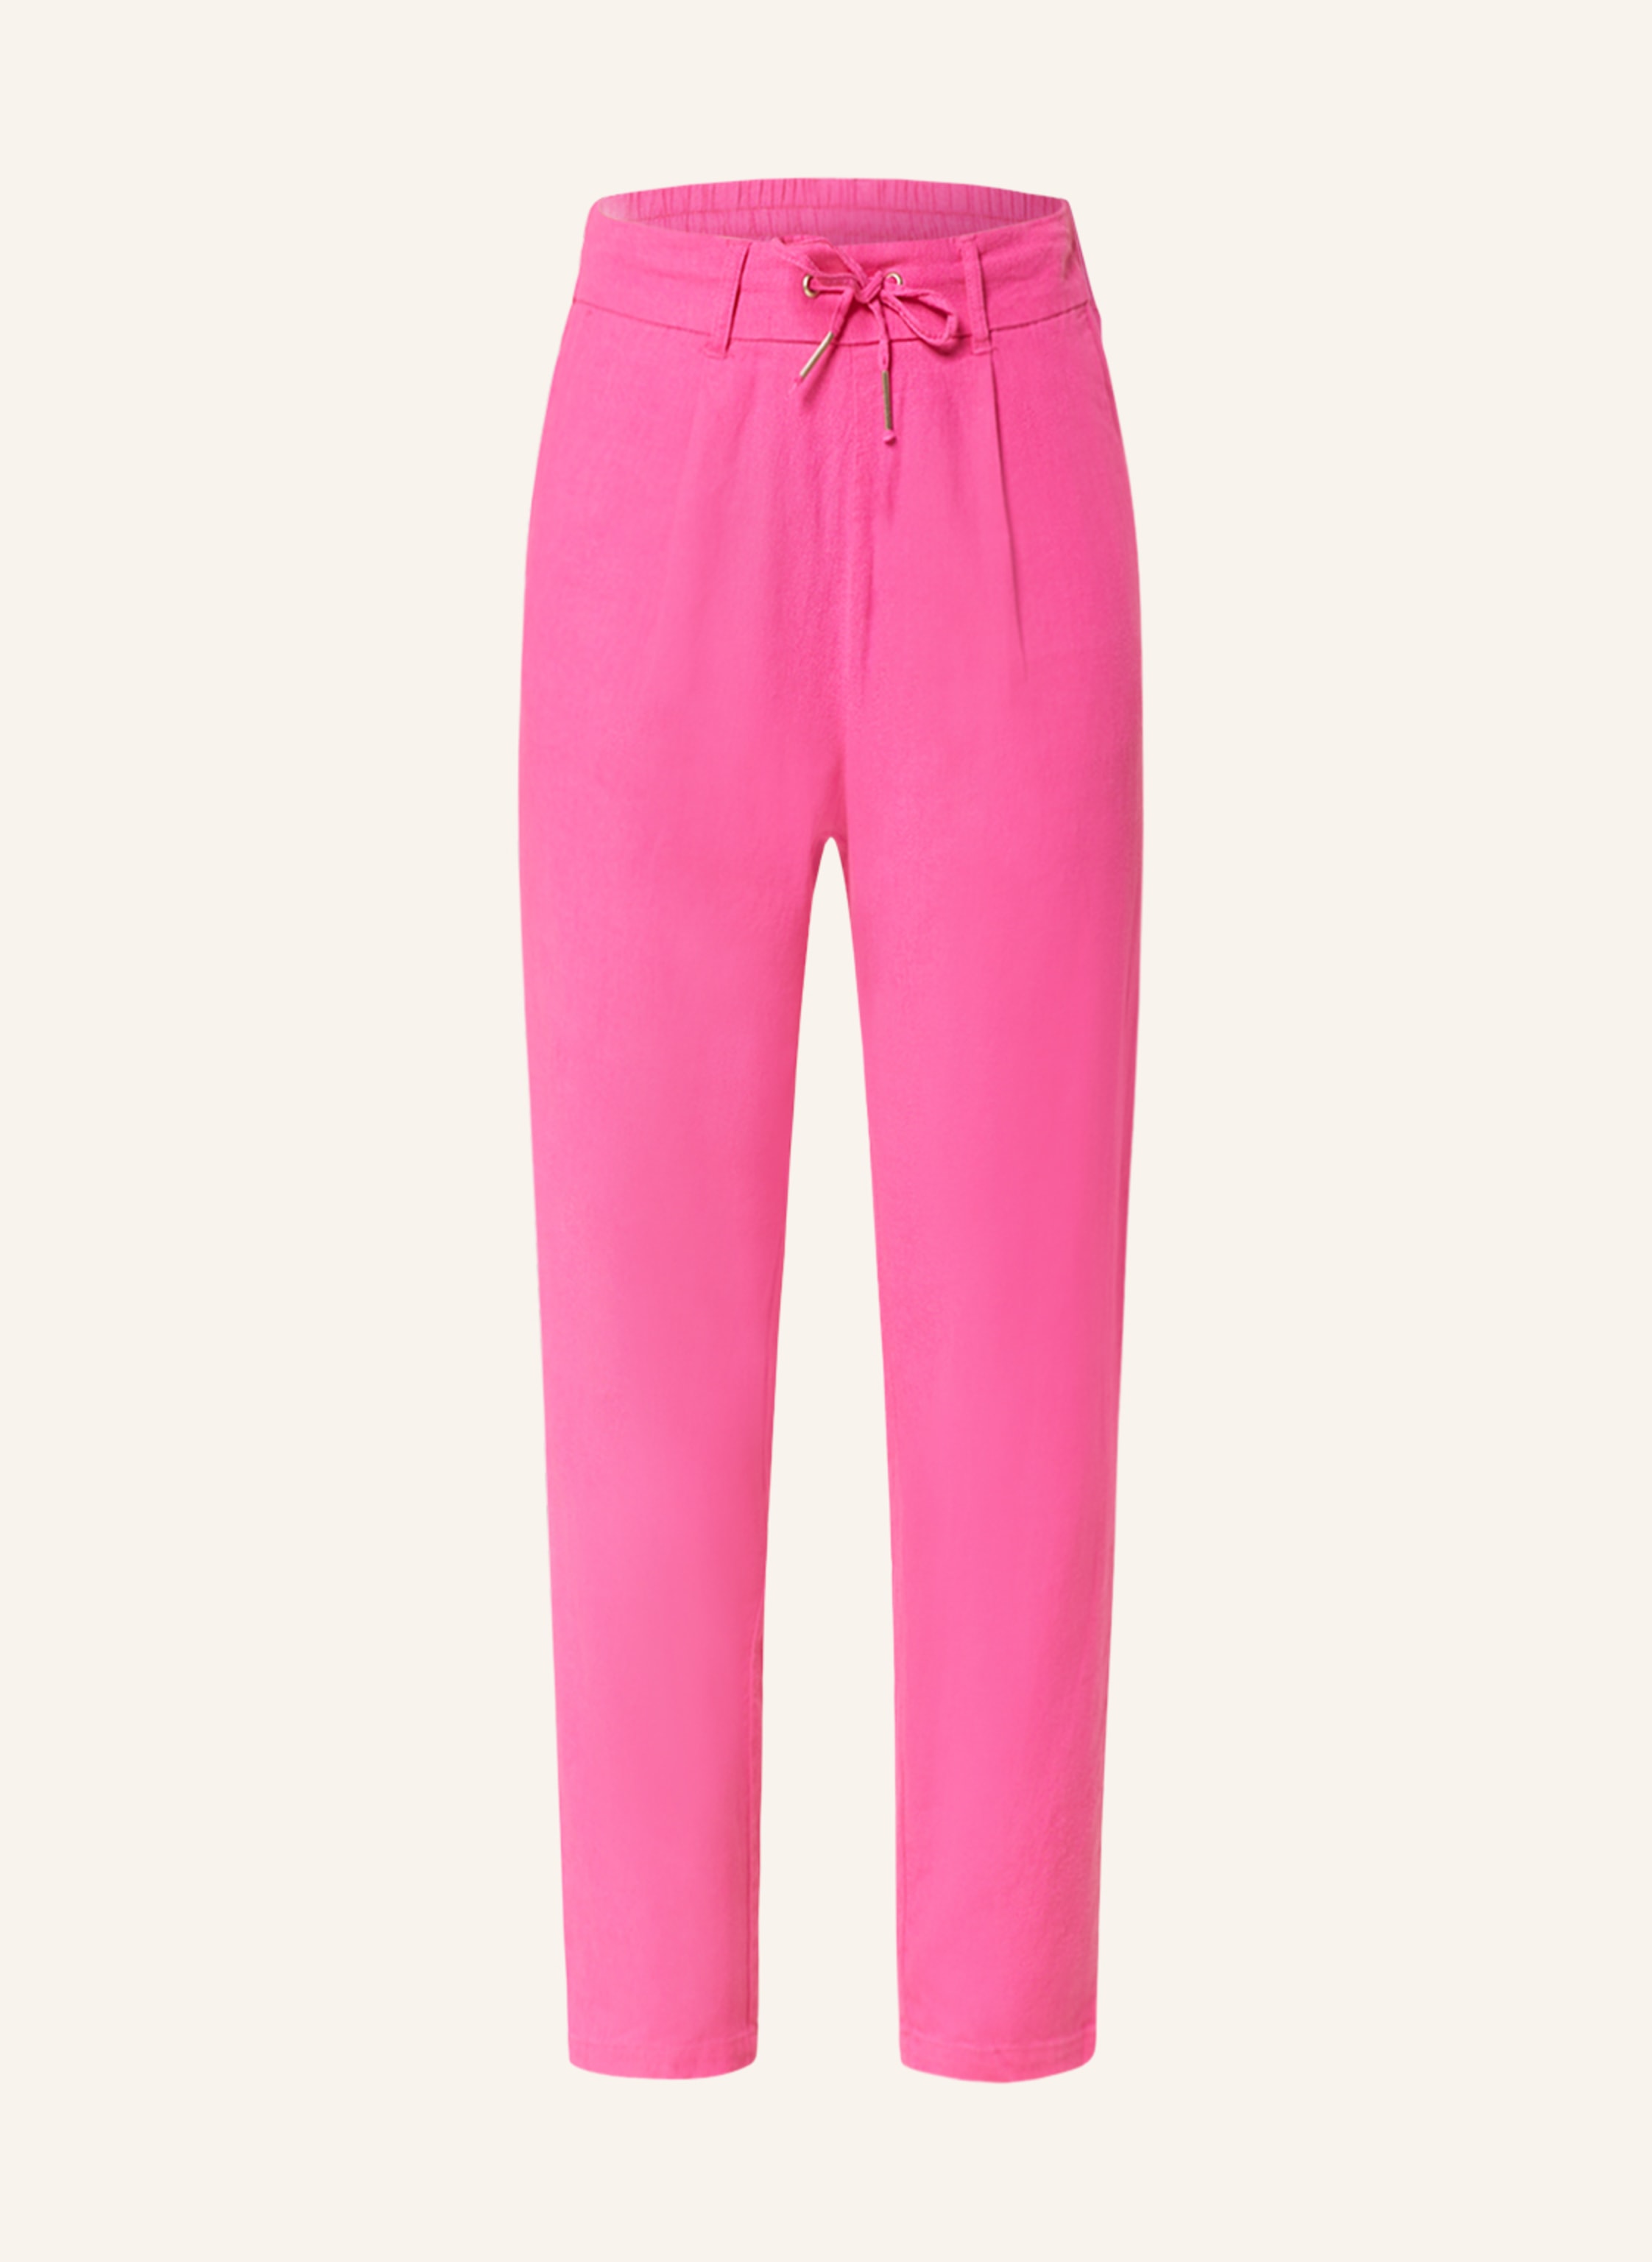 ONLY Trousers with linen in pink | Breuninger